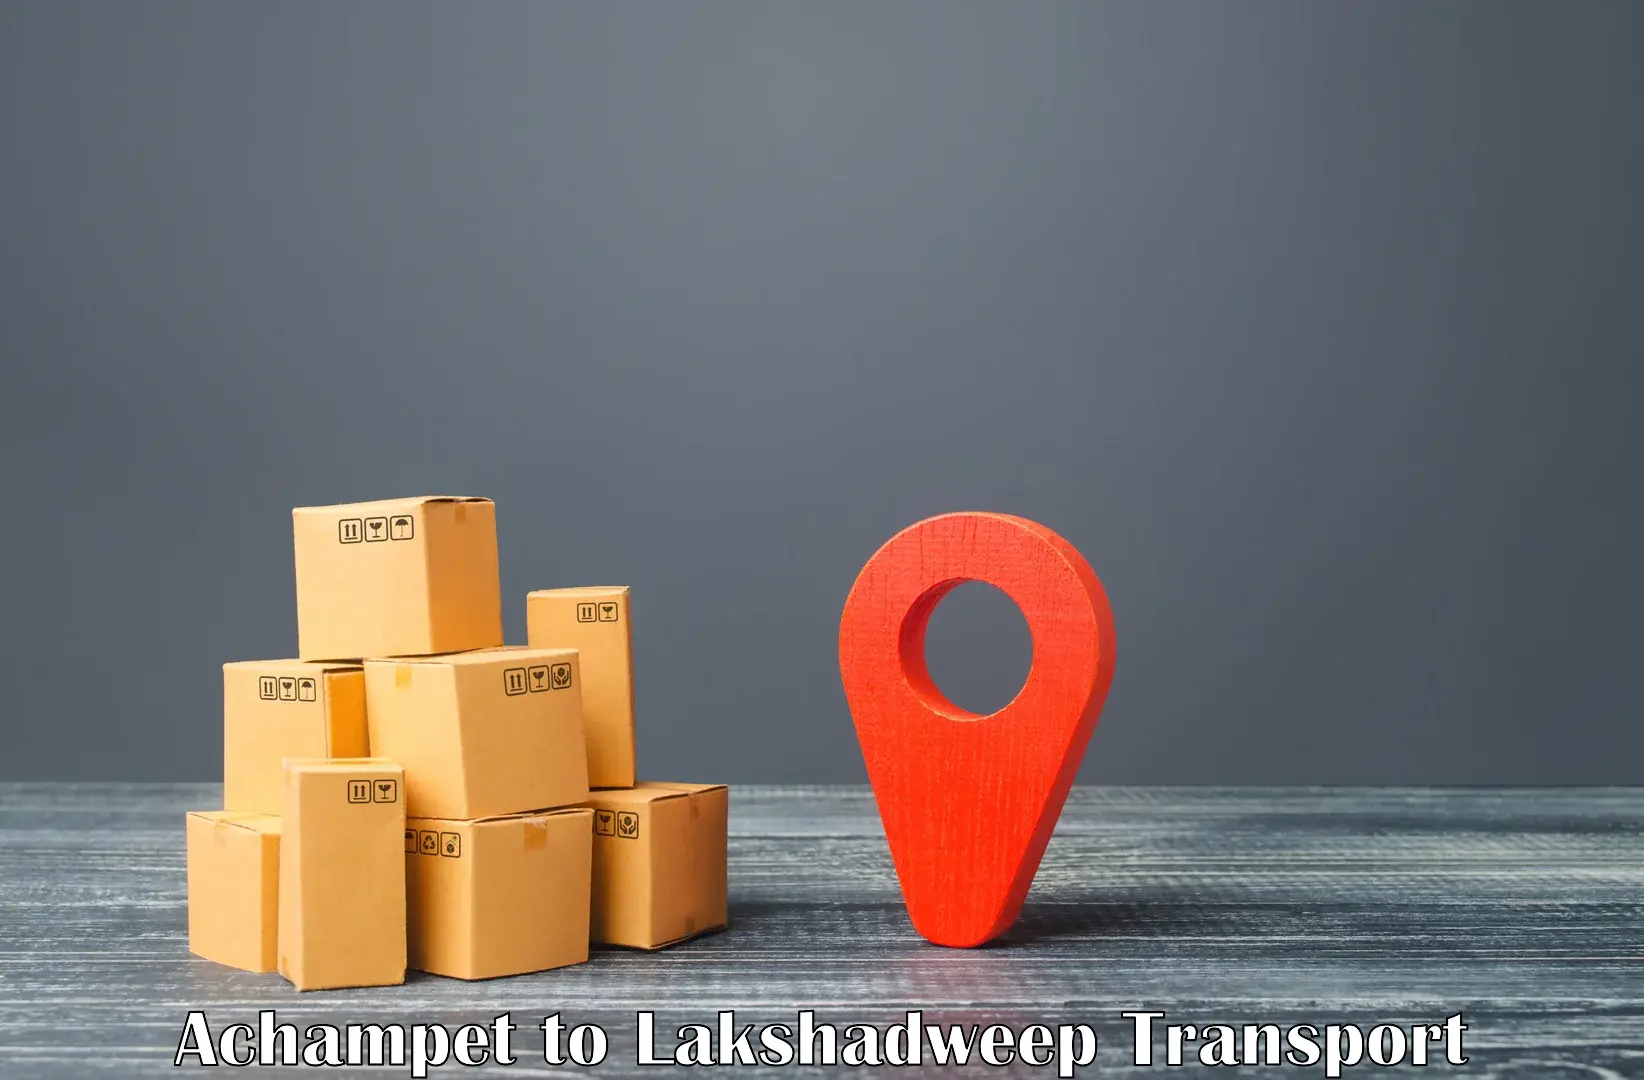 Truck transport companies in India Achampet to Lakshadweep